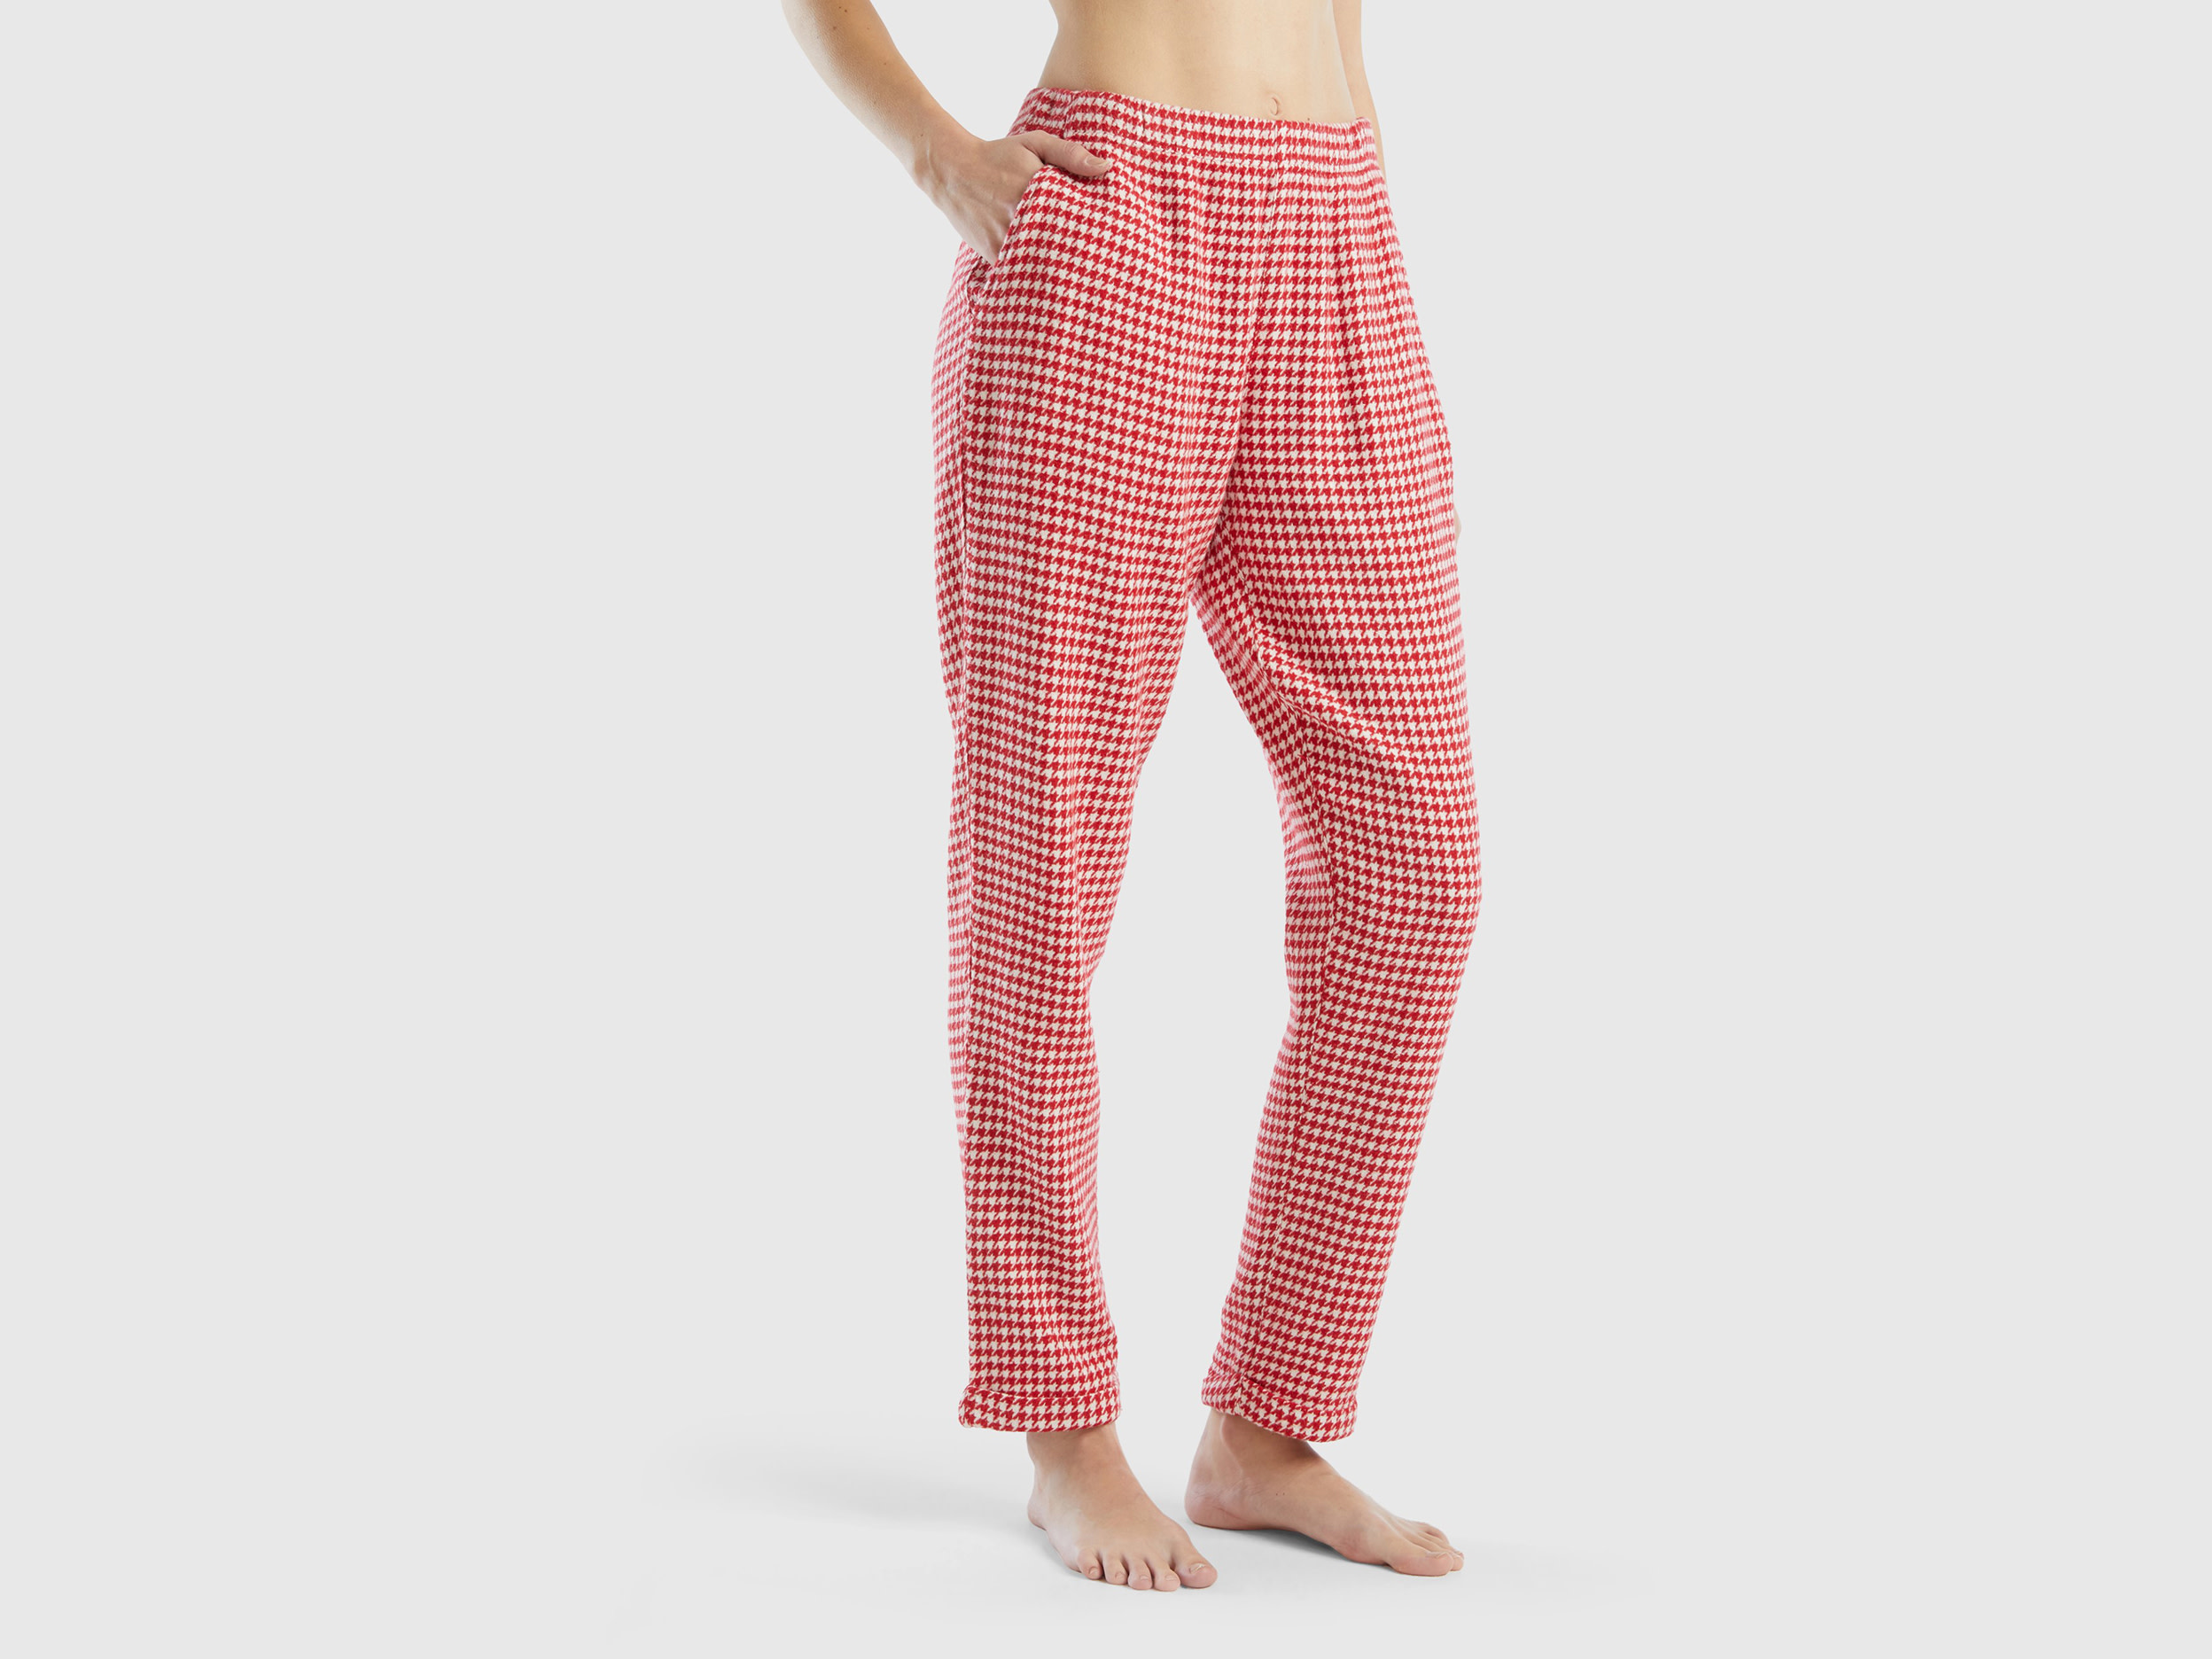 Benetton, Houndstooth Pants, size L, Red, Women